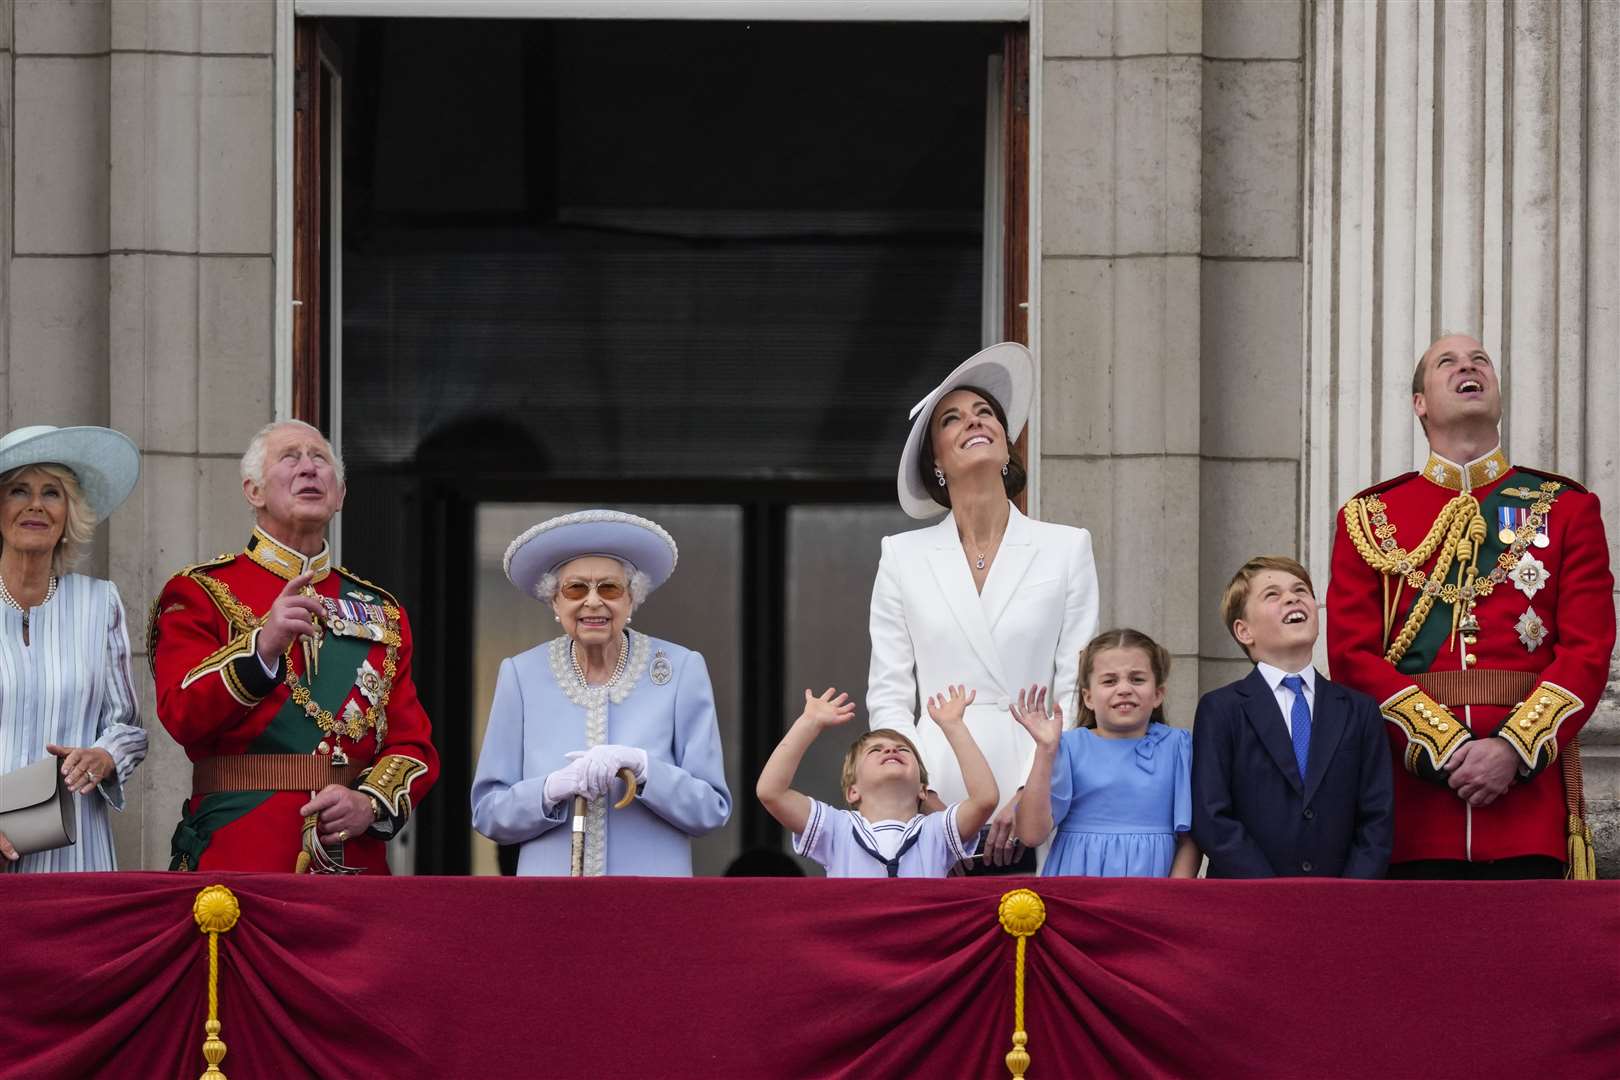 The royal family during the Platinum Jubilee of 2022 (Alastair Grant/PA)